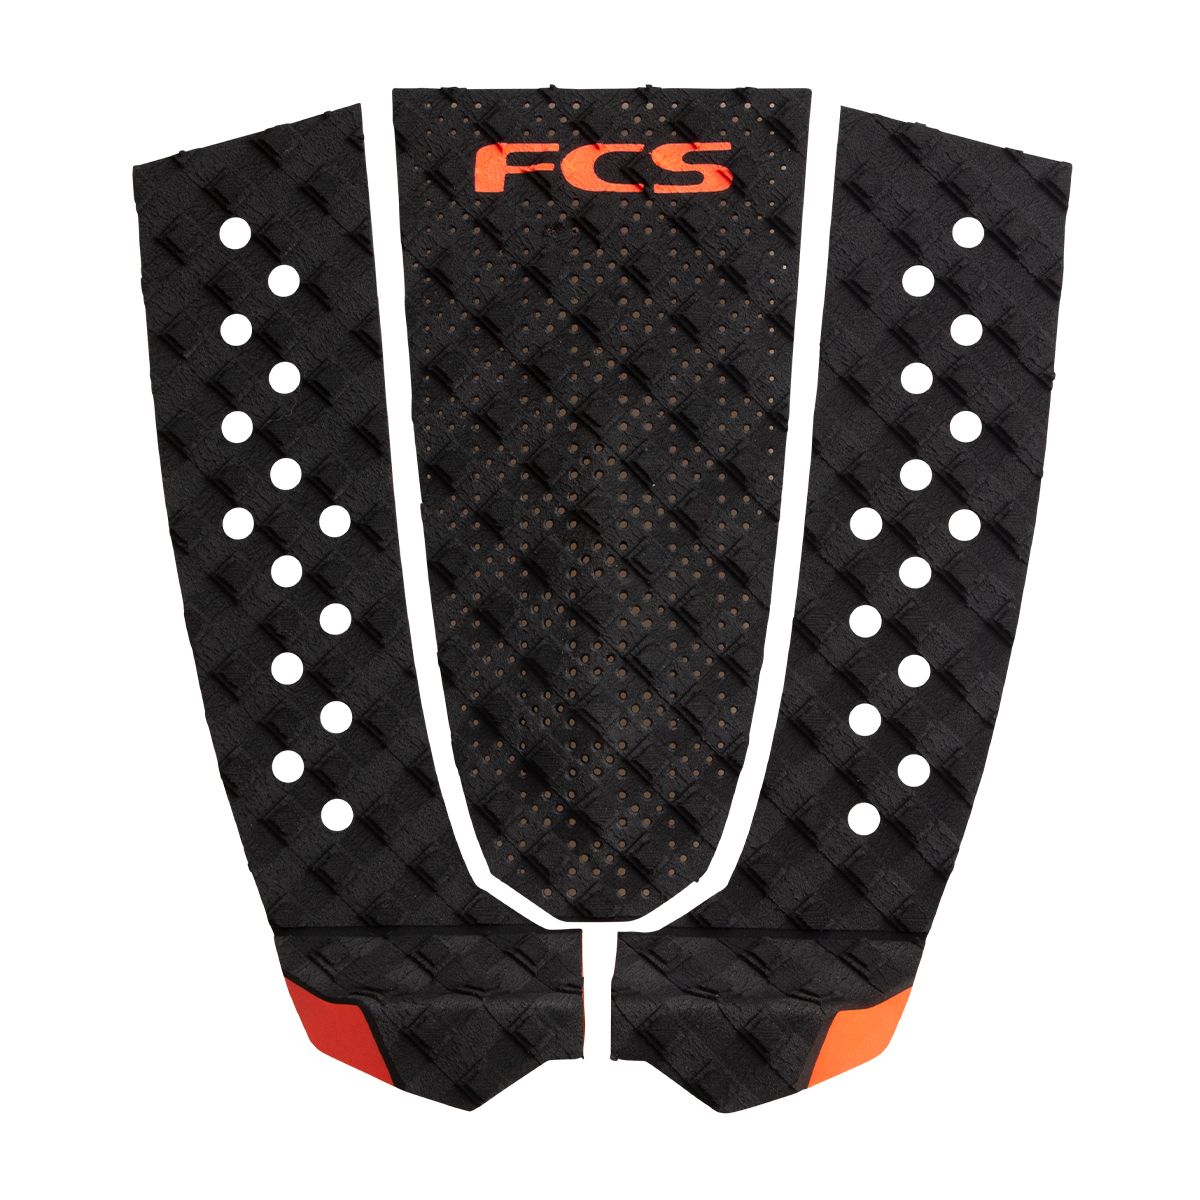 FCS T-3 Traction Pad 3 piece traction, designed to suit performance boards. Traction Pad Black Fire